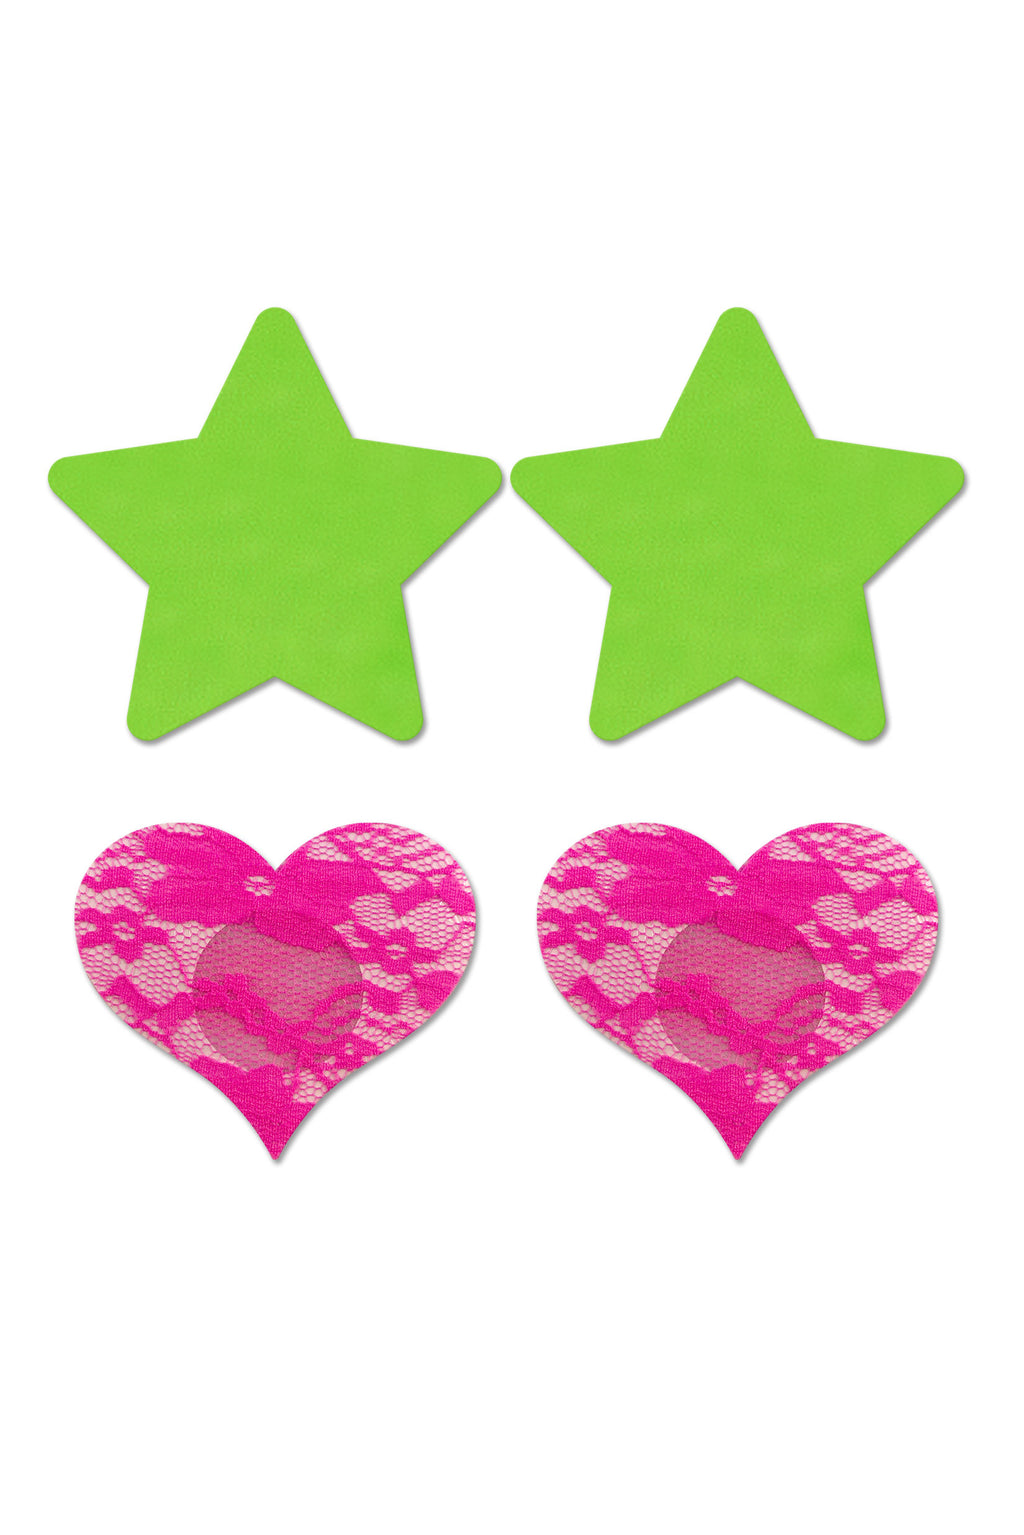 Fashion Pasties Set - Neon Green Solid Star and Neon Pink Lace Heart FL-FLA101NEON